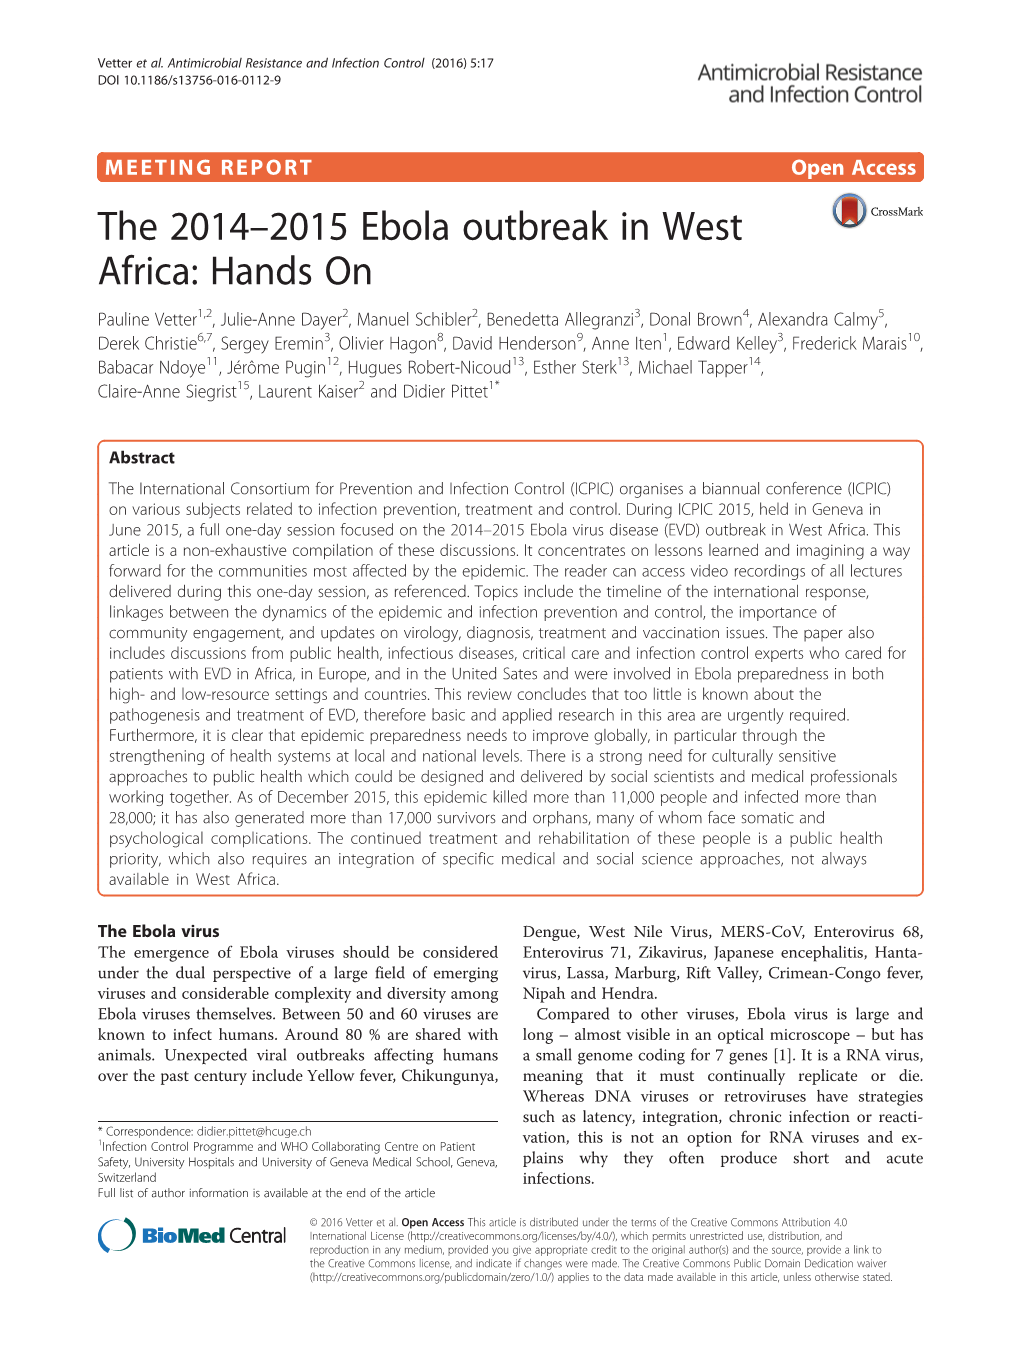 The 2014–2015 Ebola Outbreak in West Africa: Hands On